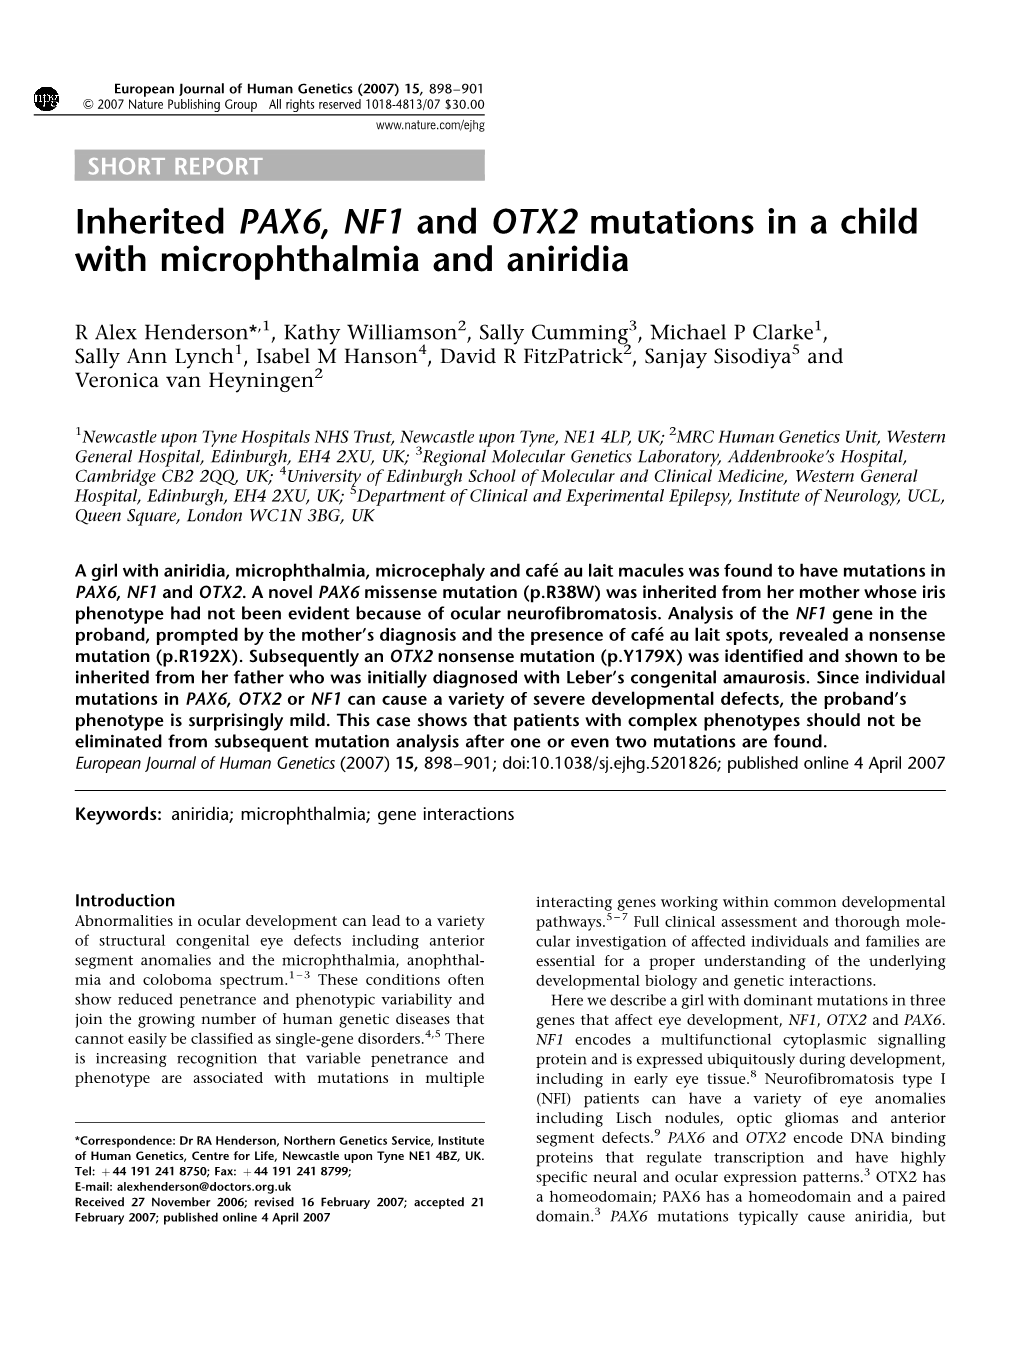 Inherited PAX6, NF1 and OTX2 Mutations in a Child with Microphthalmia and Aniridia